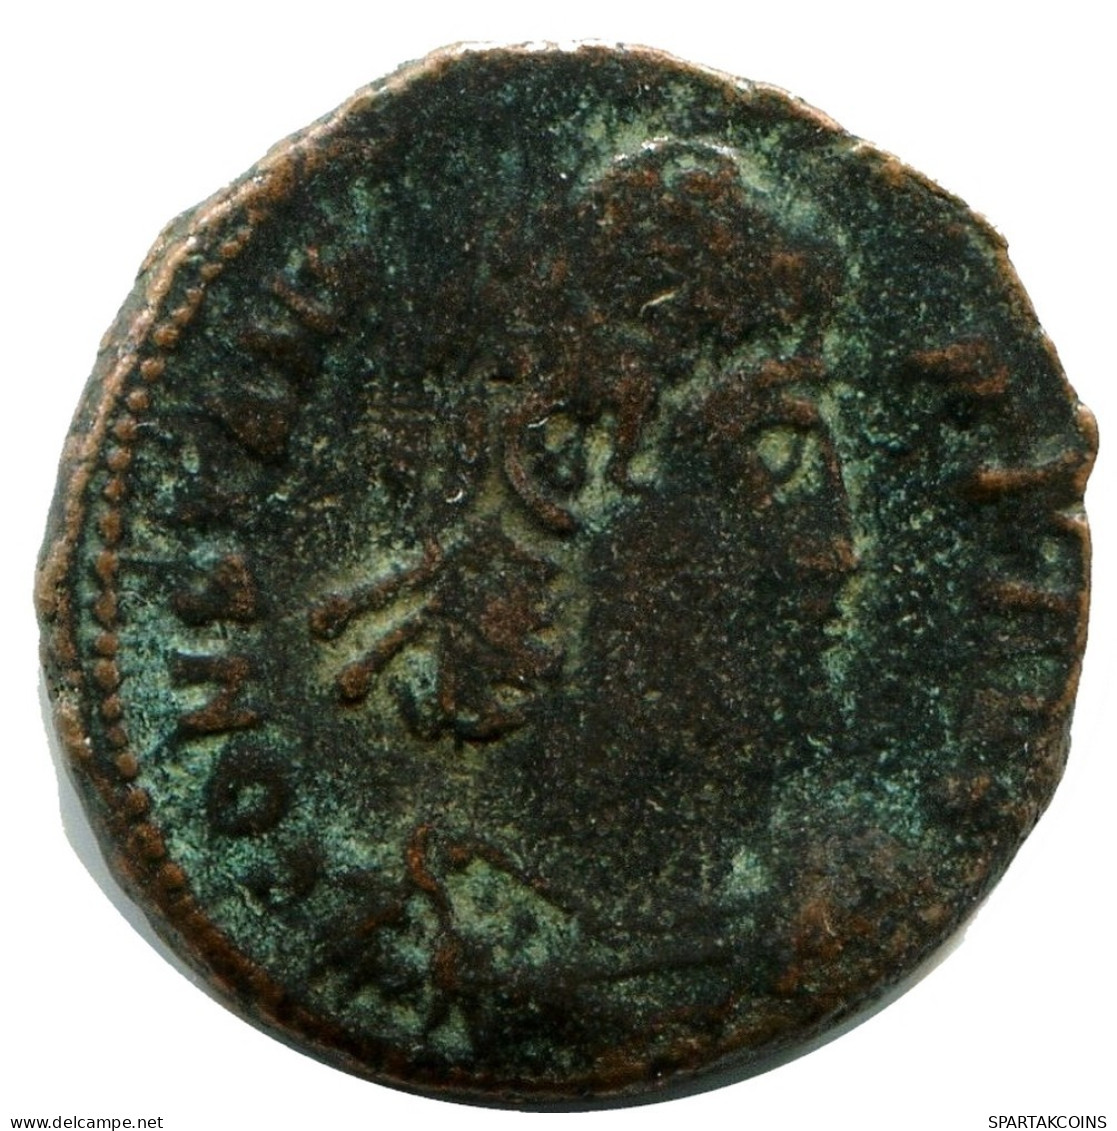 CONSTANS MINTED IN THESSALONICA FOUND IN IHNASYAH HOARD EGYPT #ANC11906.14.F.A - El Imperio Christiano (307 / 363)